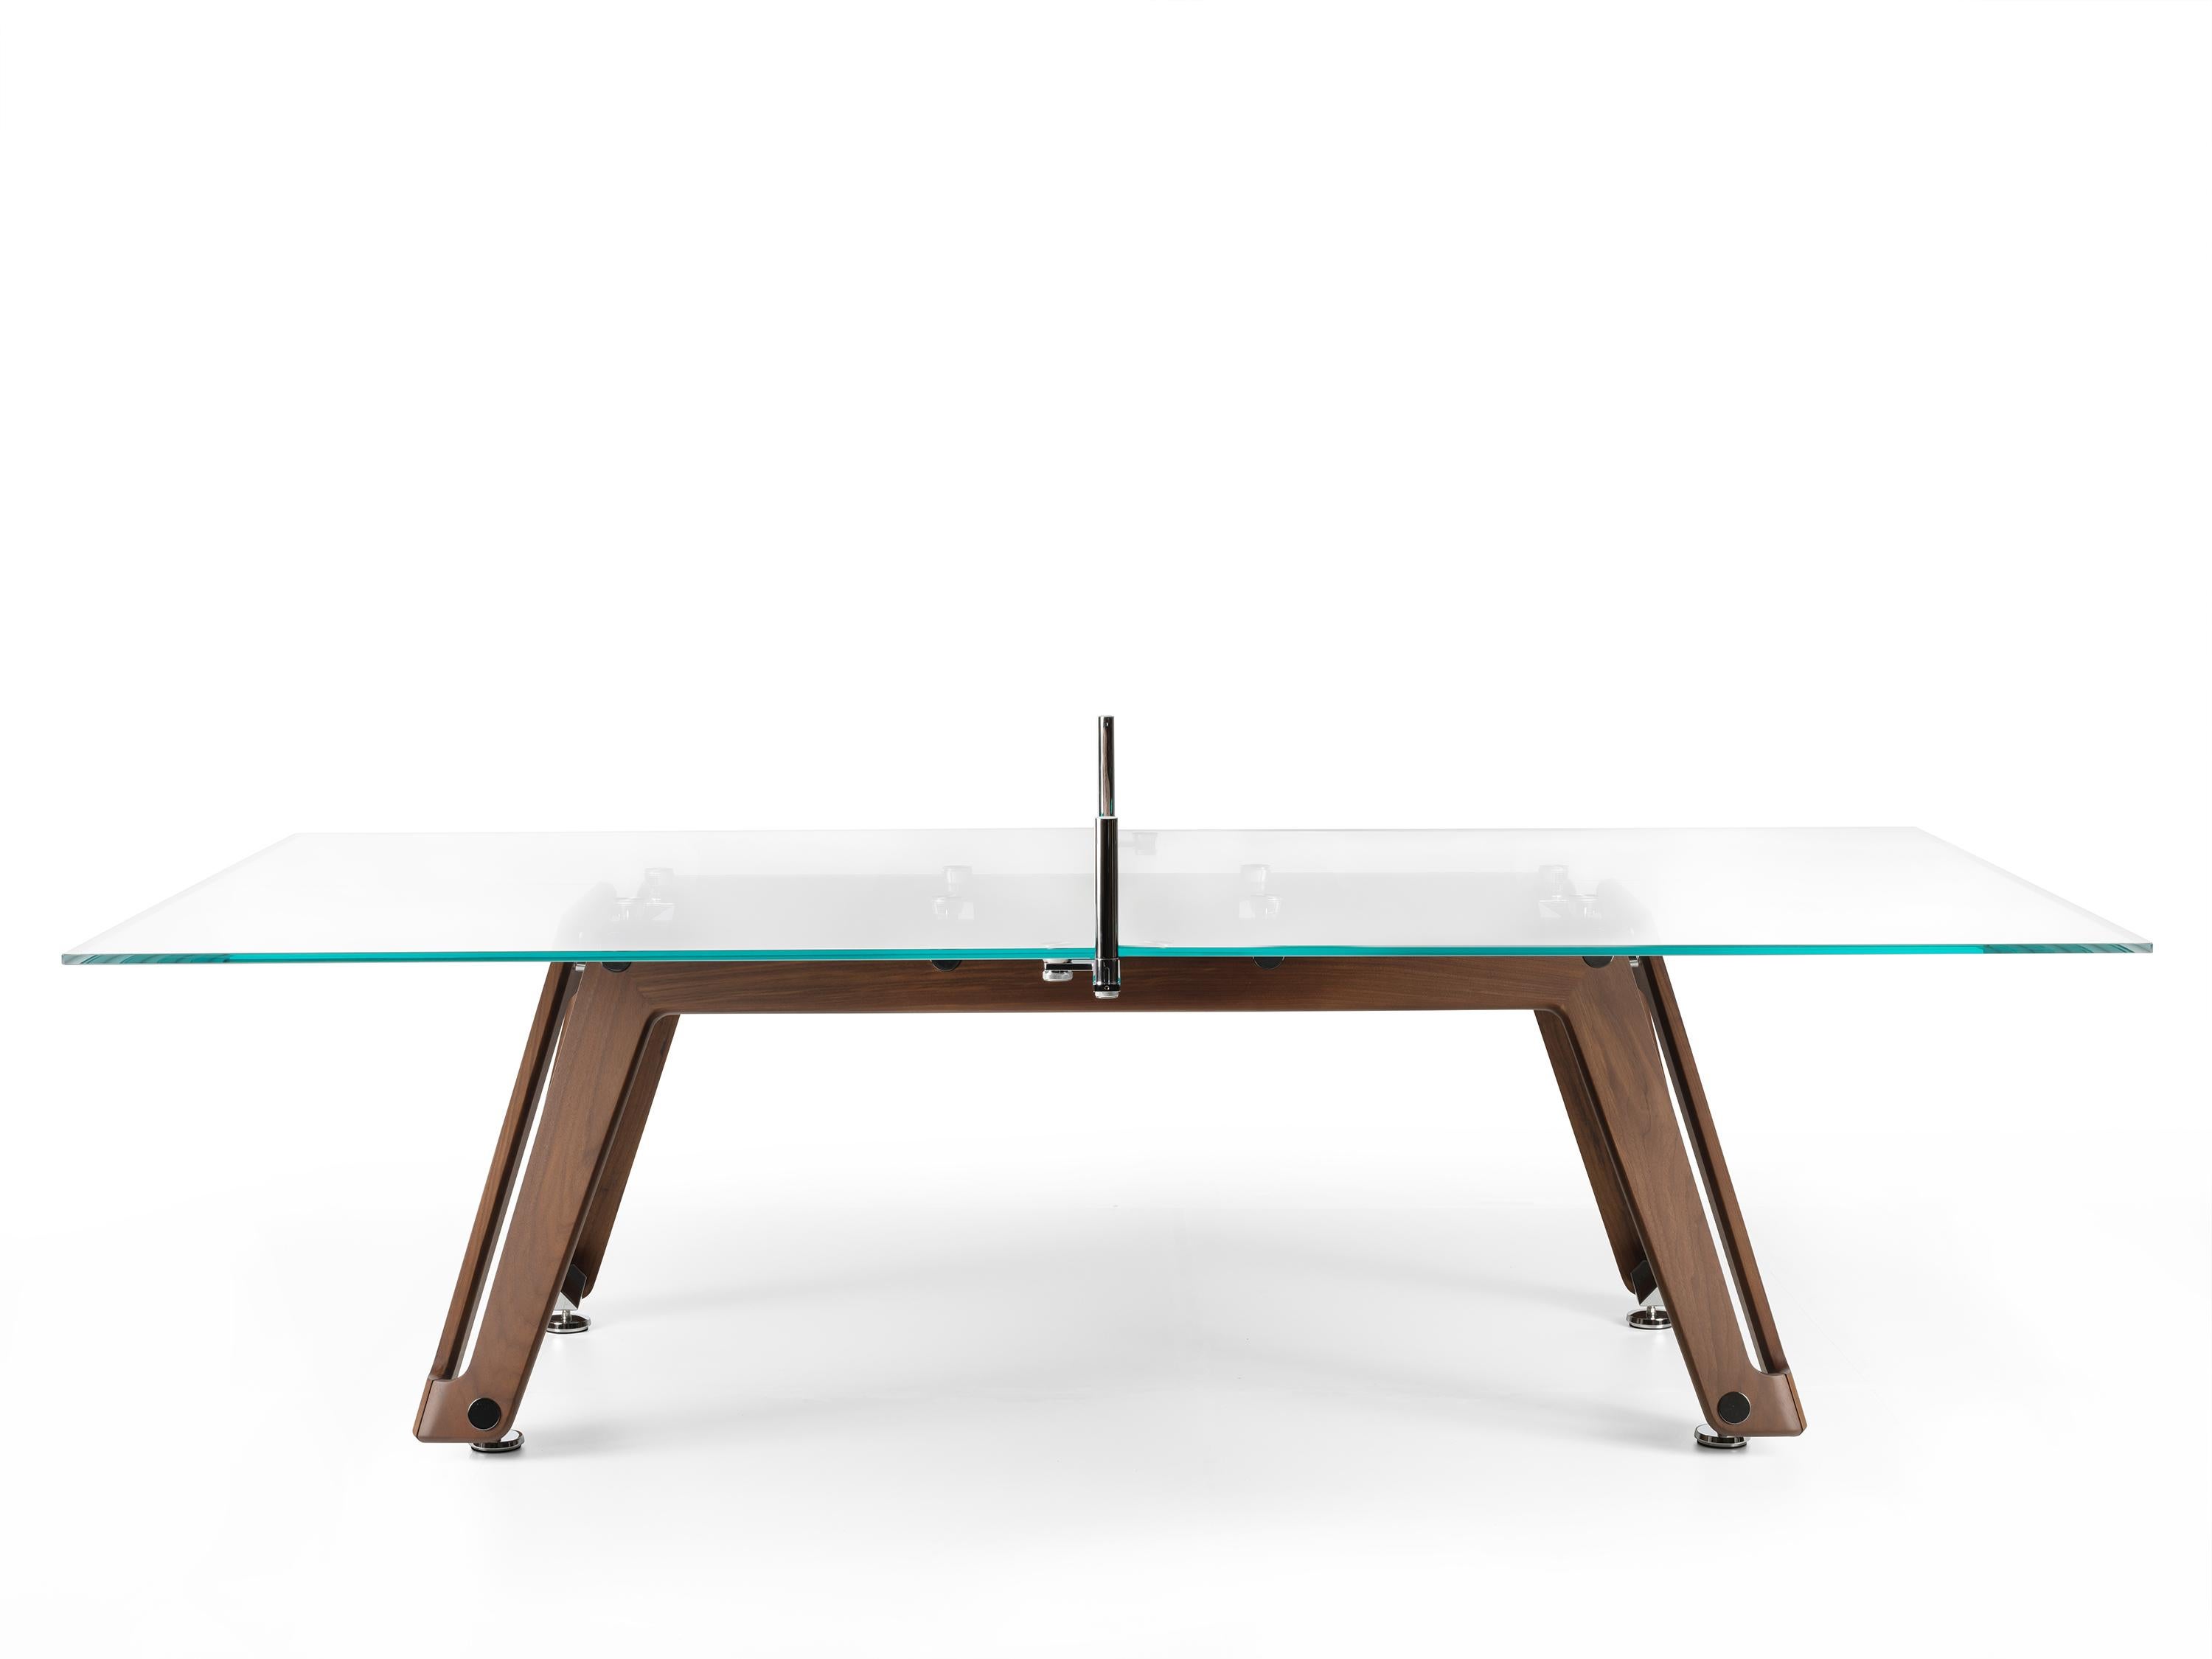 The Lungolinea Wood ping pong table is a vision, a desire to ambitiously reinterpret the classics. It demonstrates the sophistication and ingenuity of Italian design and craftsmanship in the game of table tennis. It is a refined object, a sublime